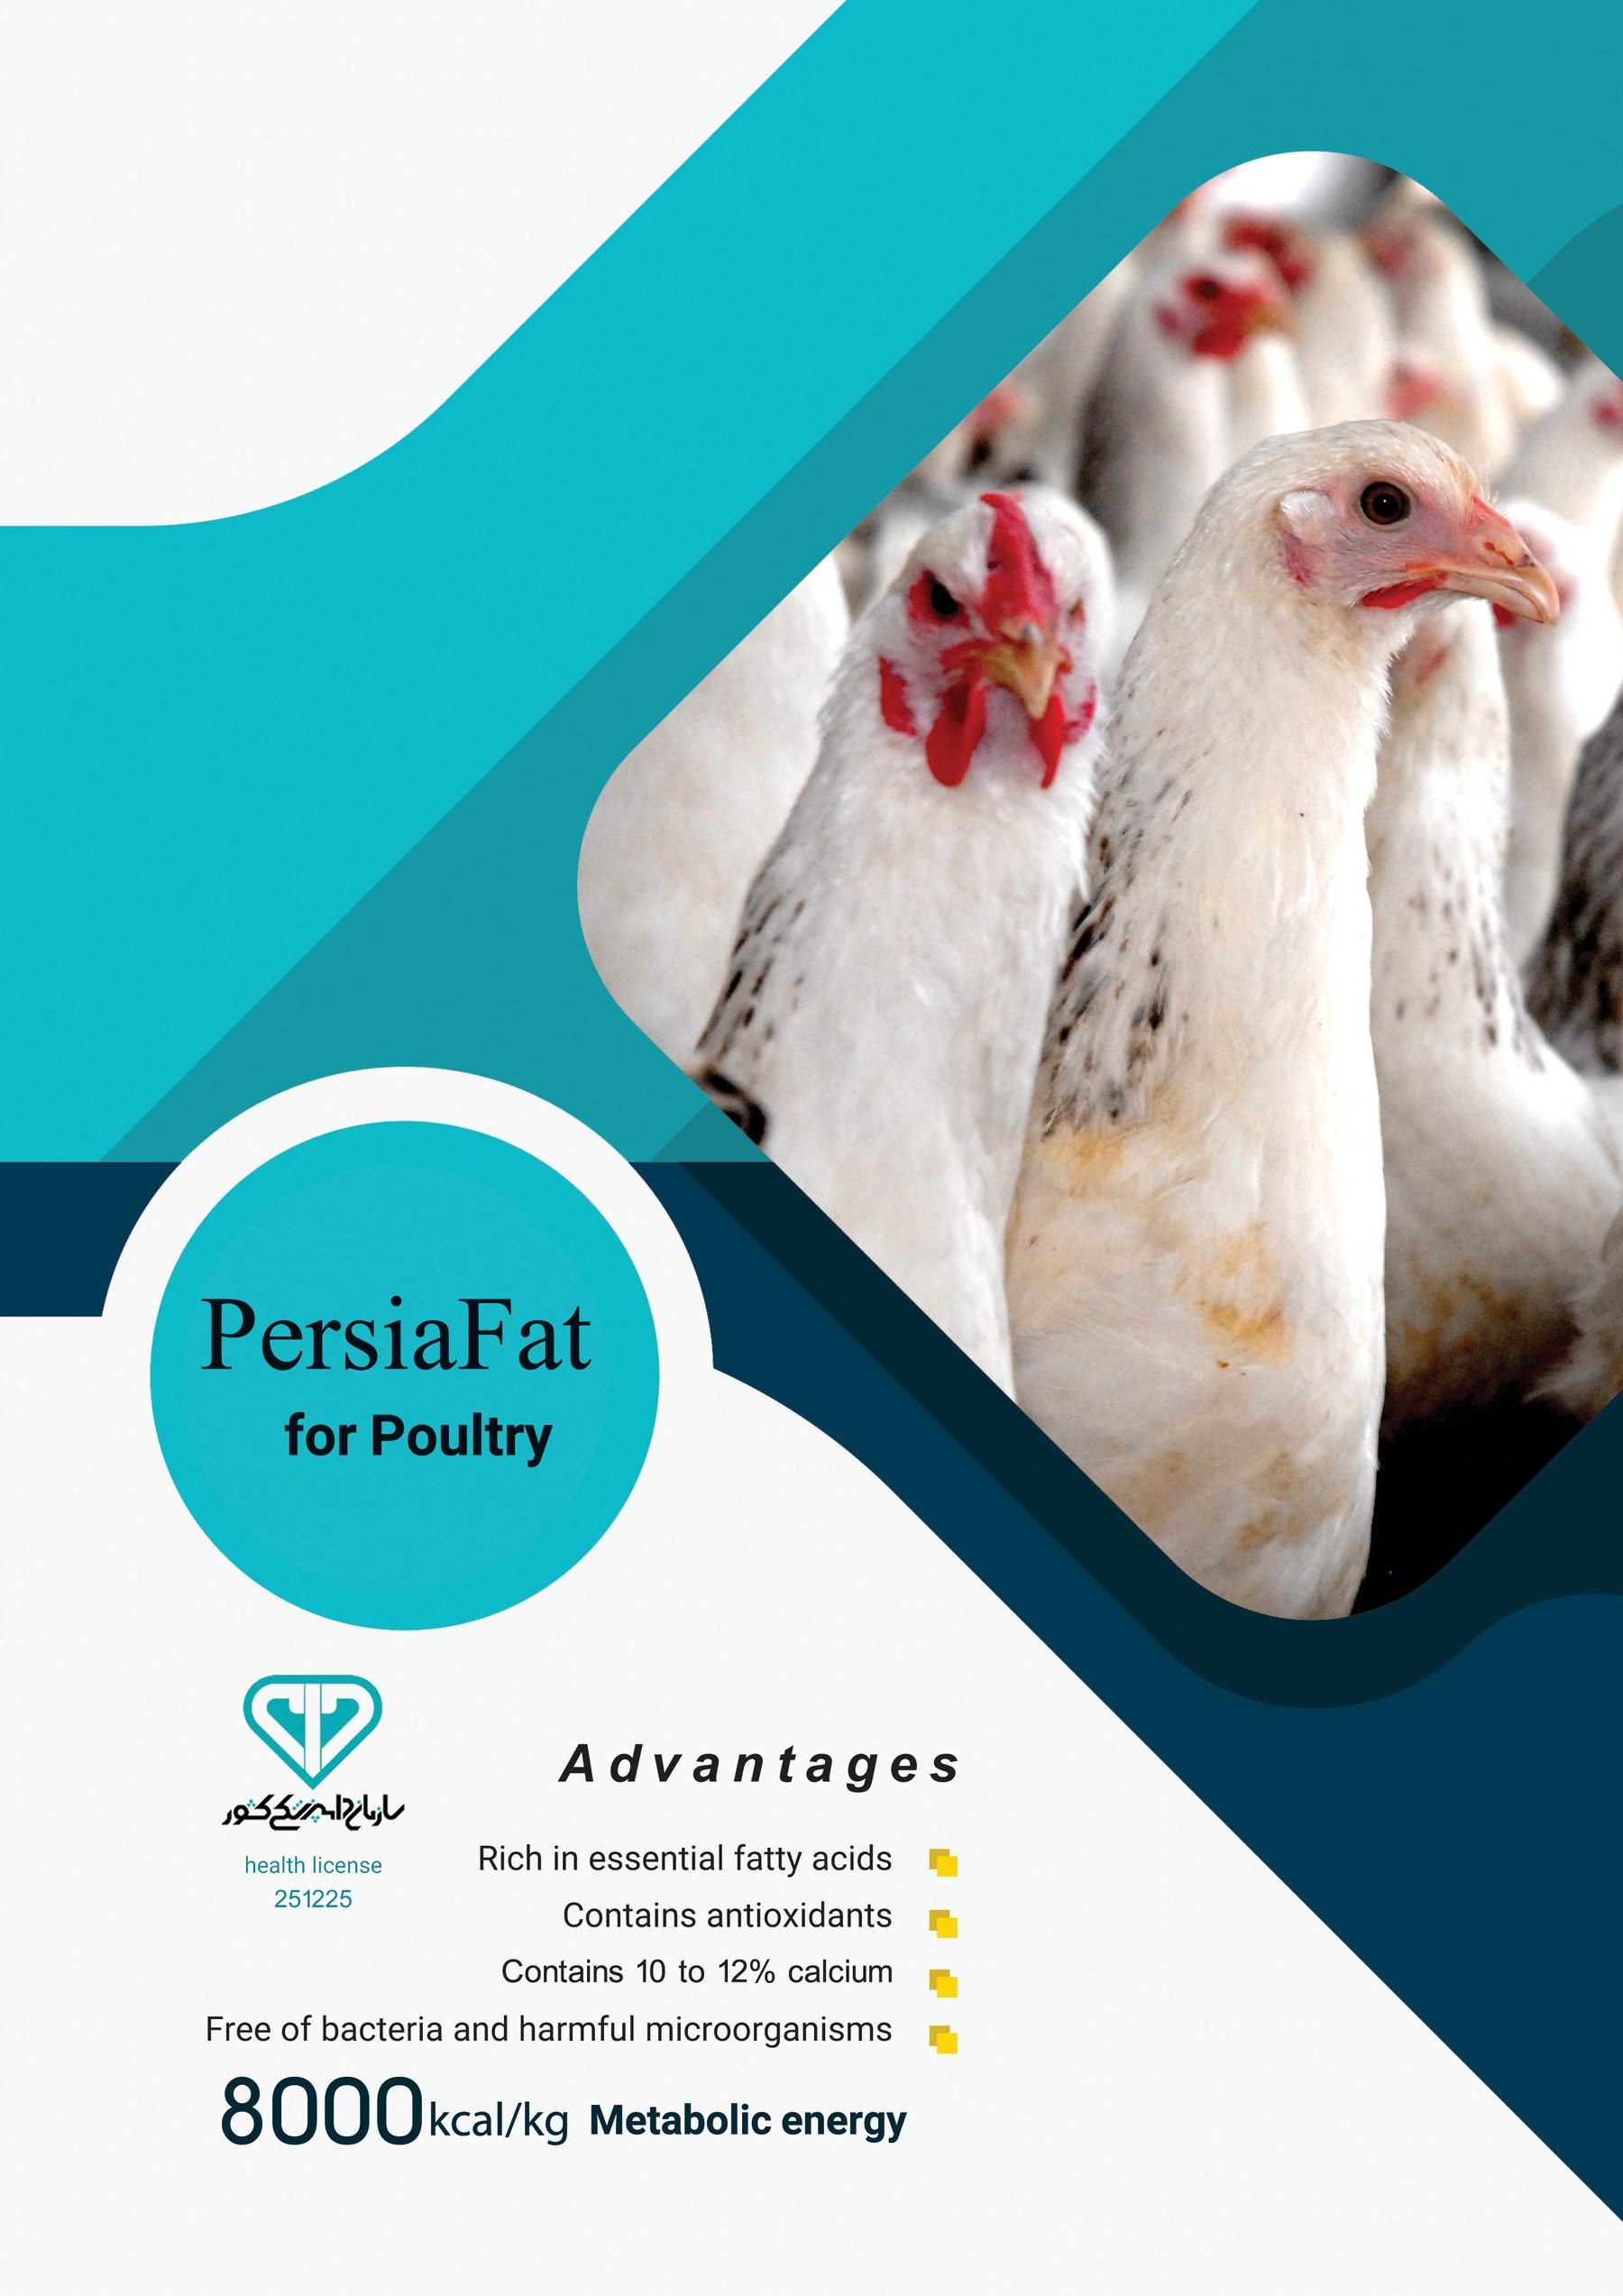 Persiafat Poultry